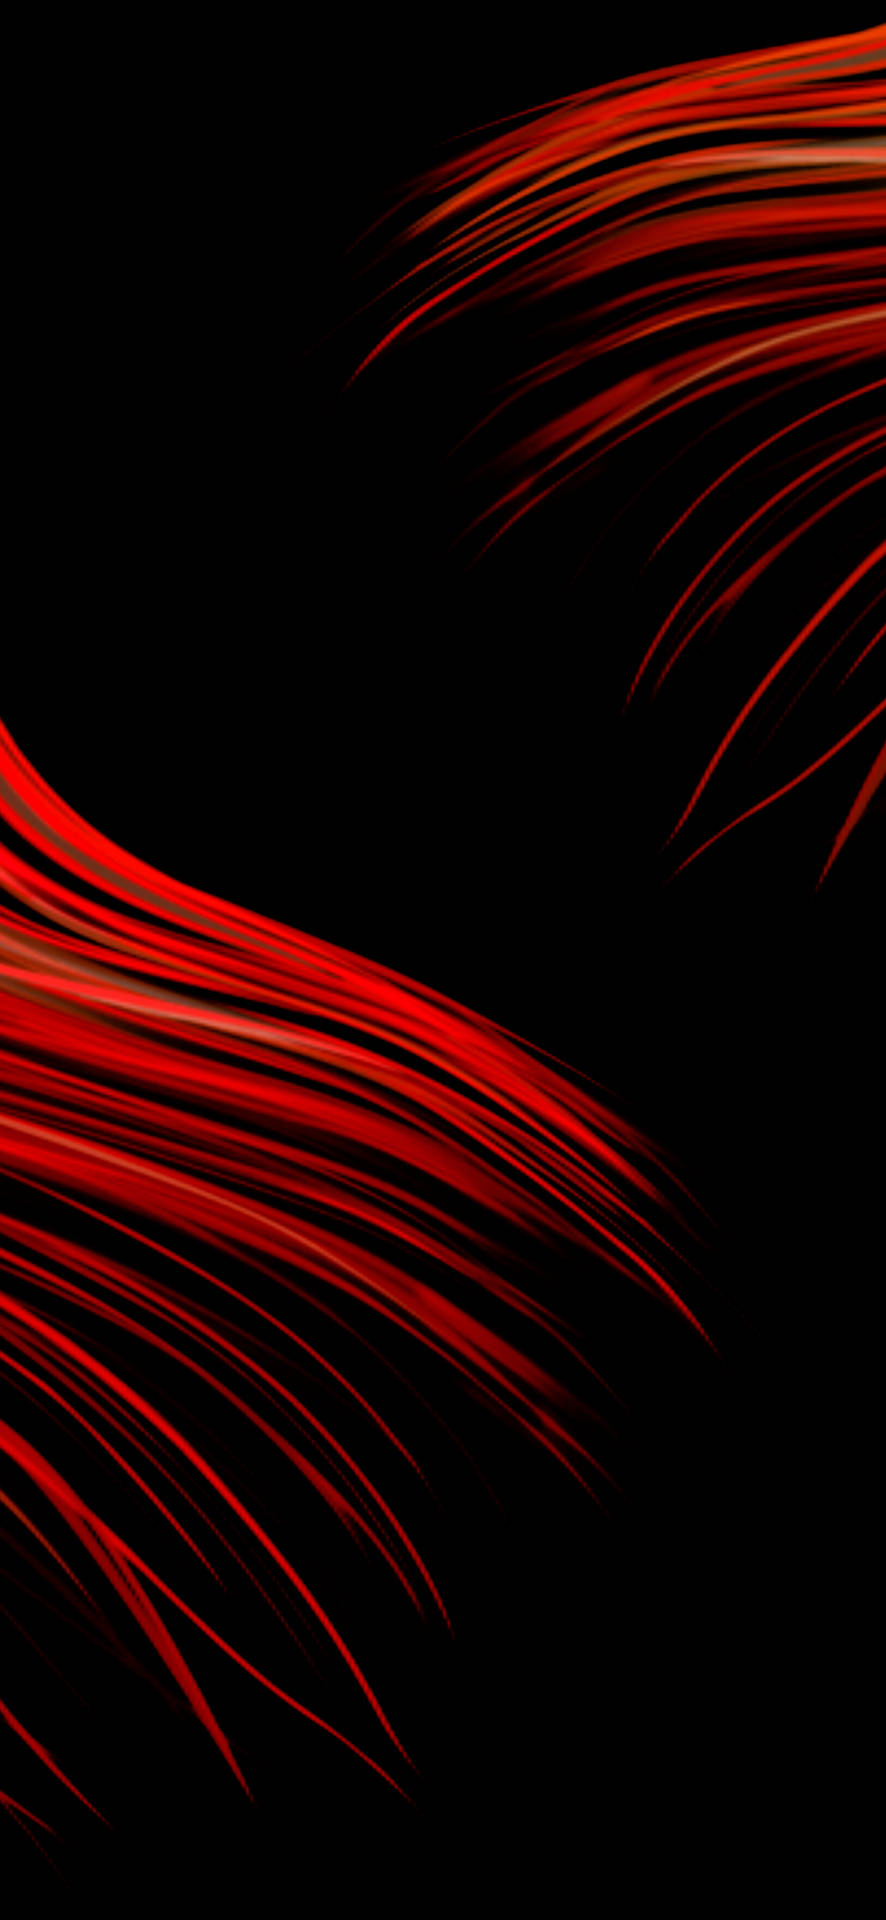 Professional Red And Black Digital Art Background